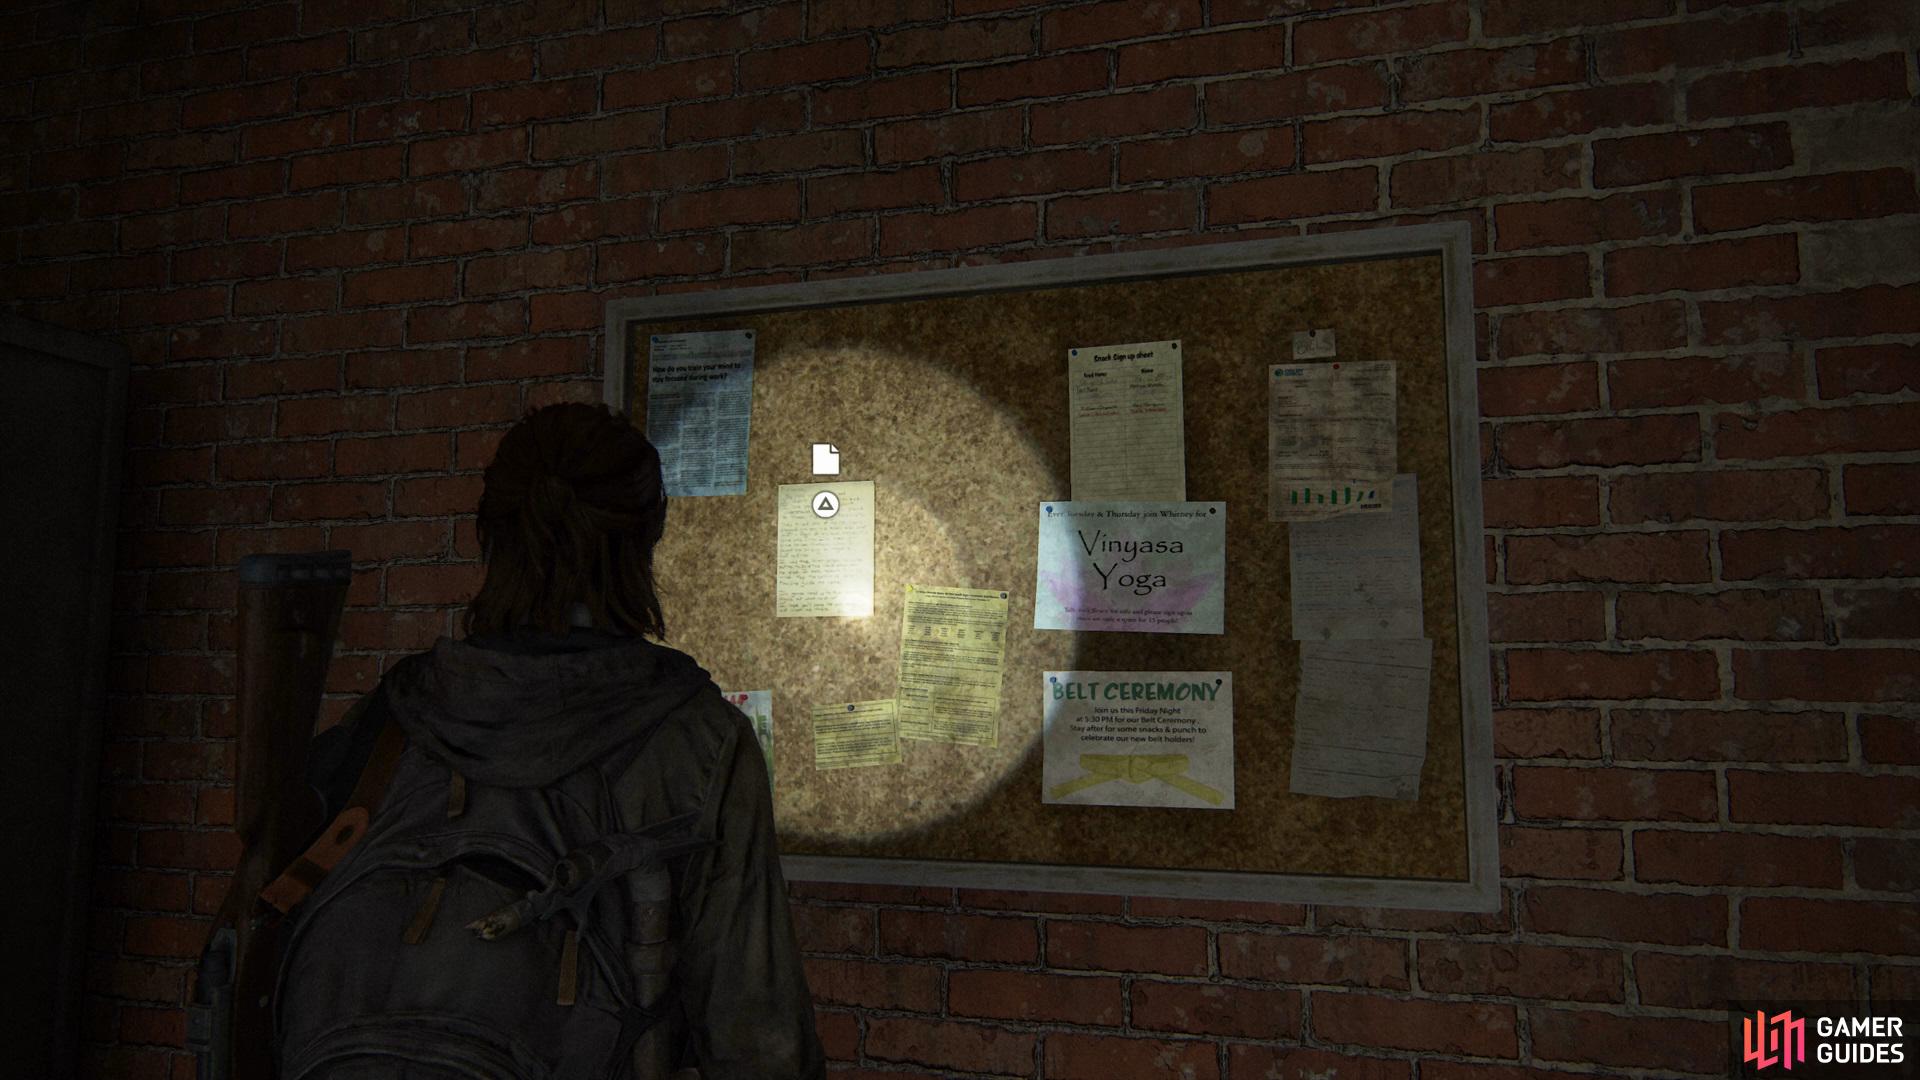 Once you reach an area full of bodies, head into the building on the right to find an Artefact pinned to the noticeboard